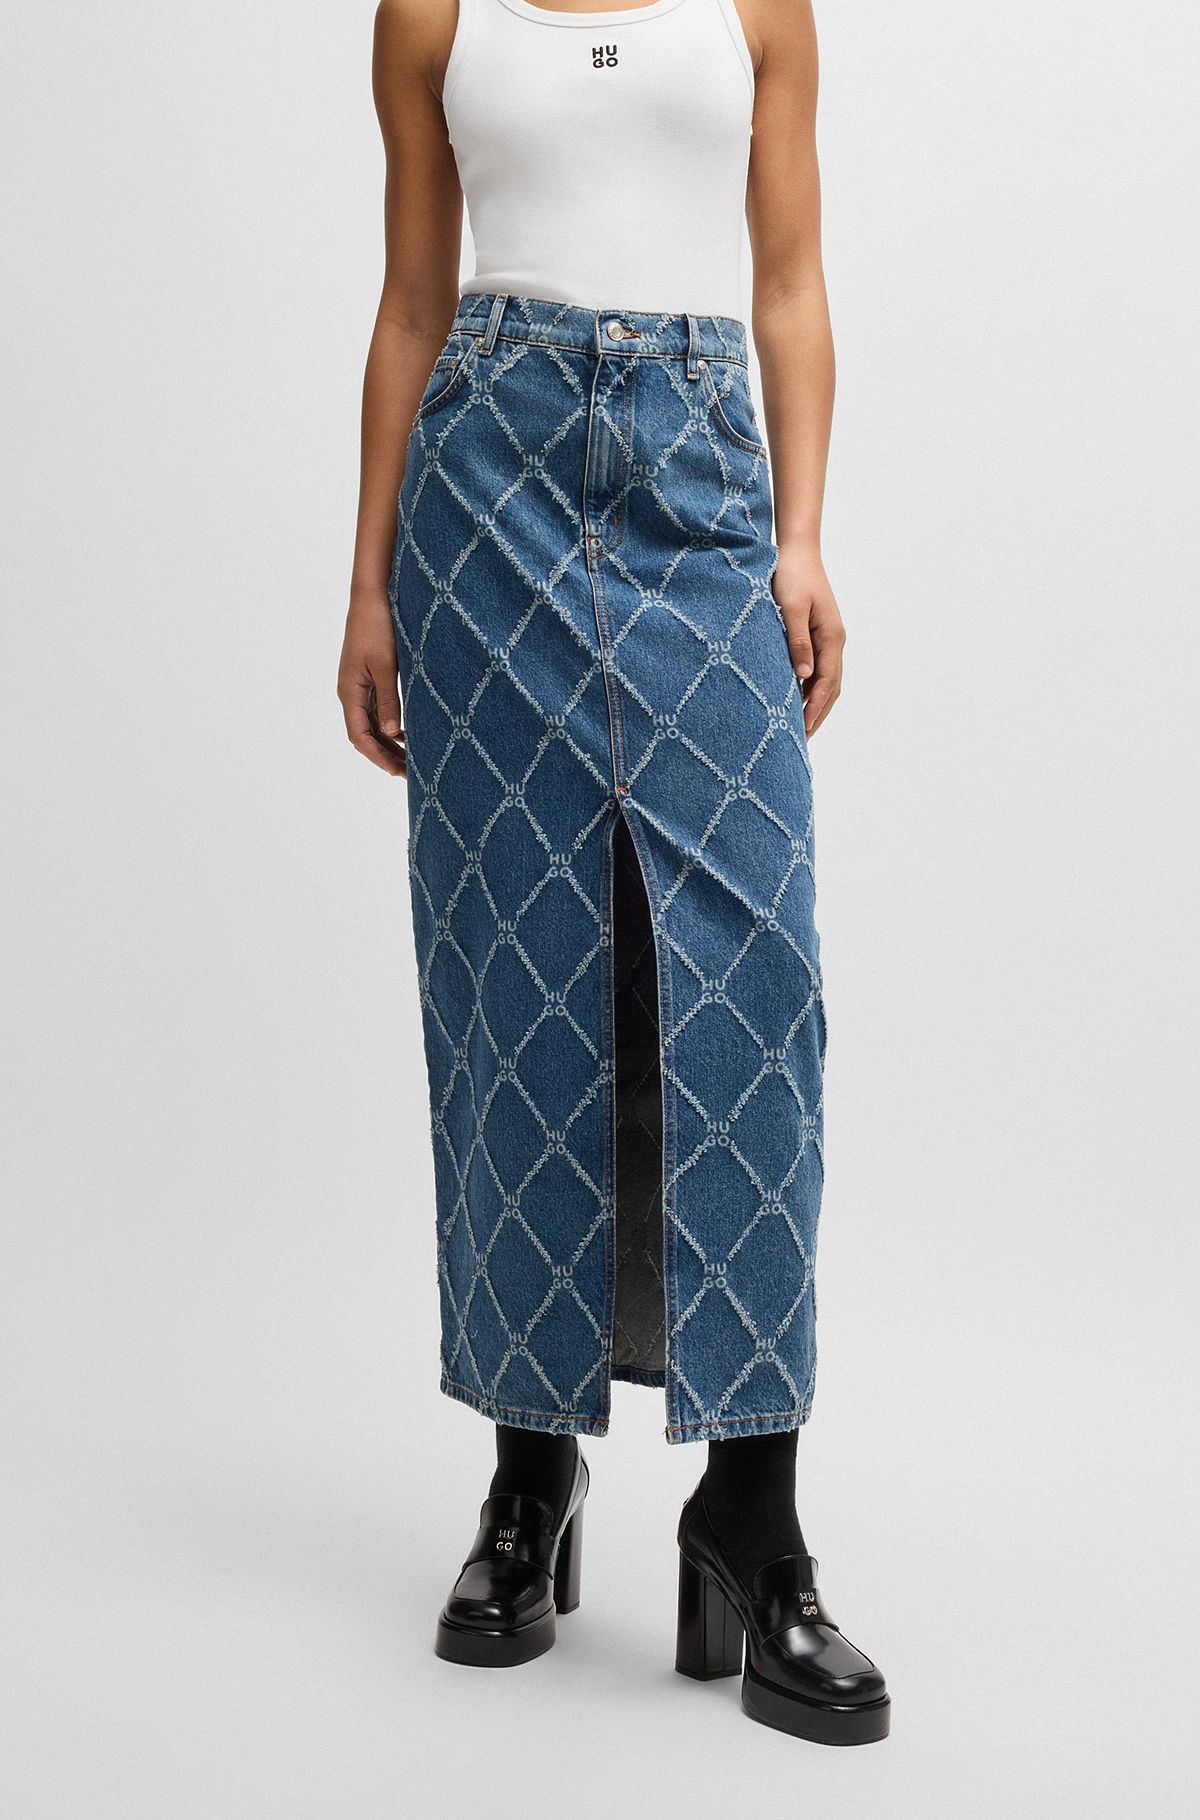 Rigid-denim maxi skirt with stacked-logo pattern, Blue Patterned